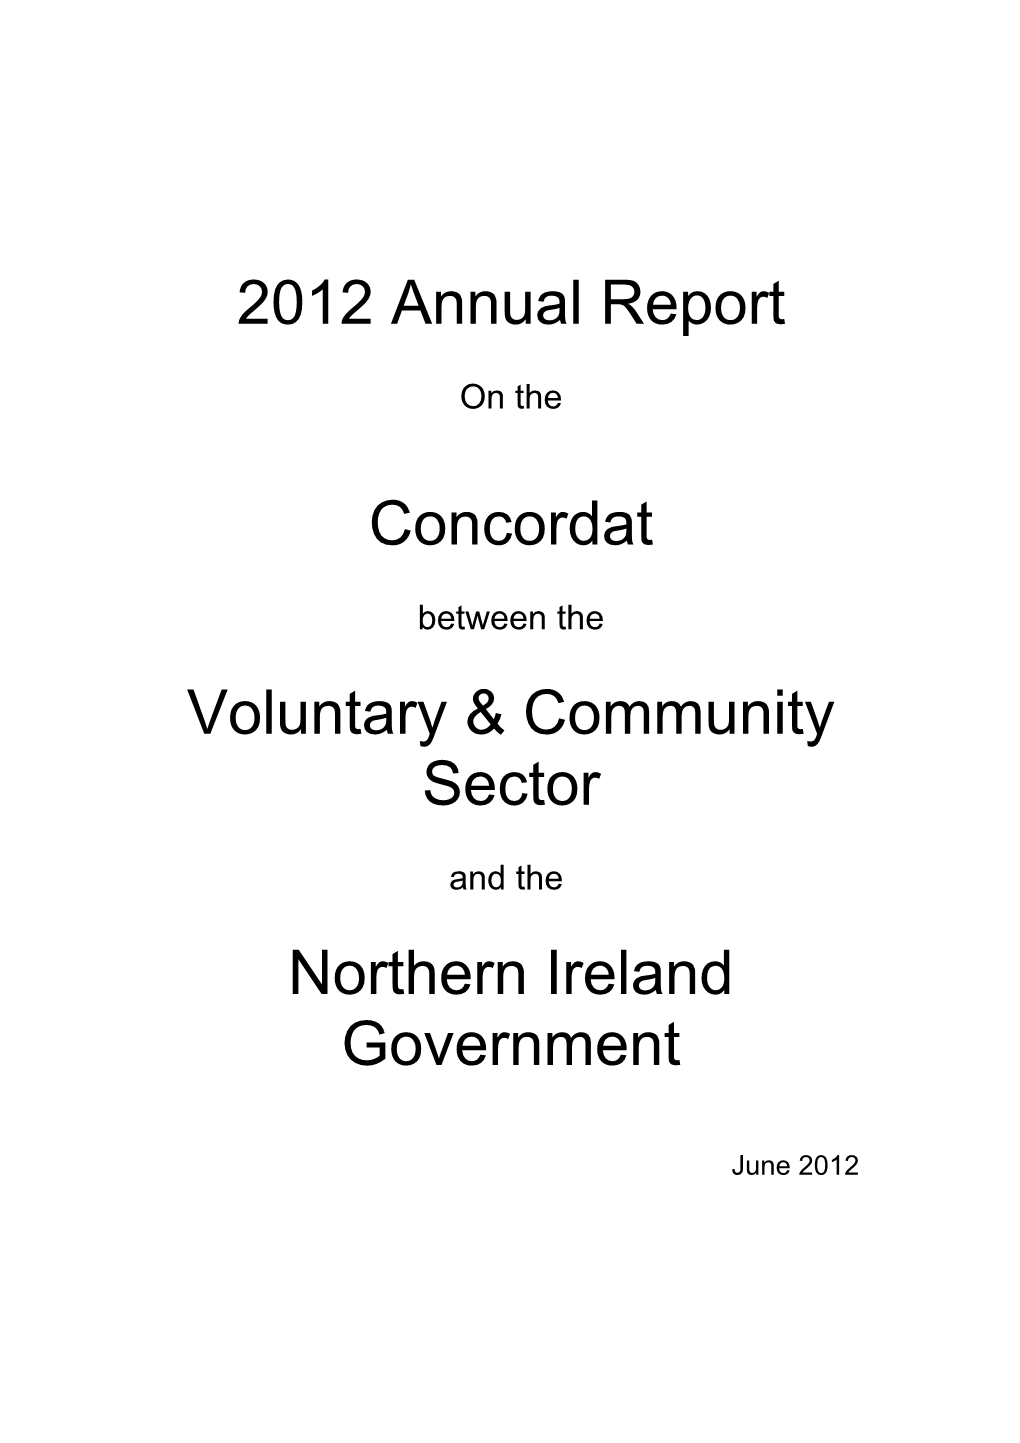 2012 Annual Report on the Concordat Between the Voluntary & Community Sector and the Northern